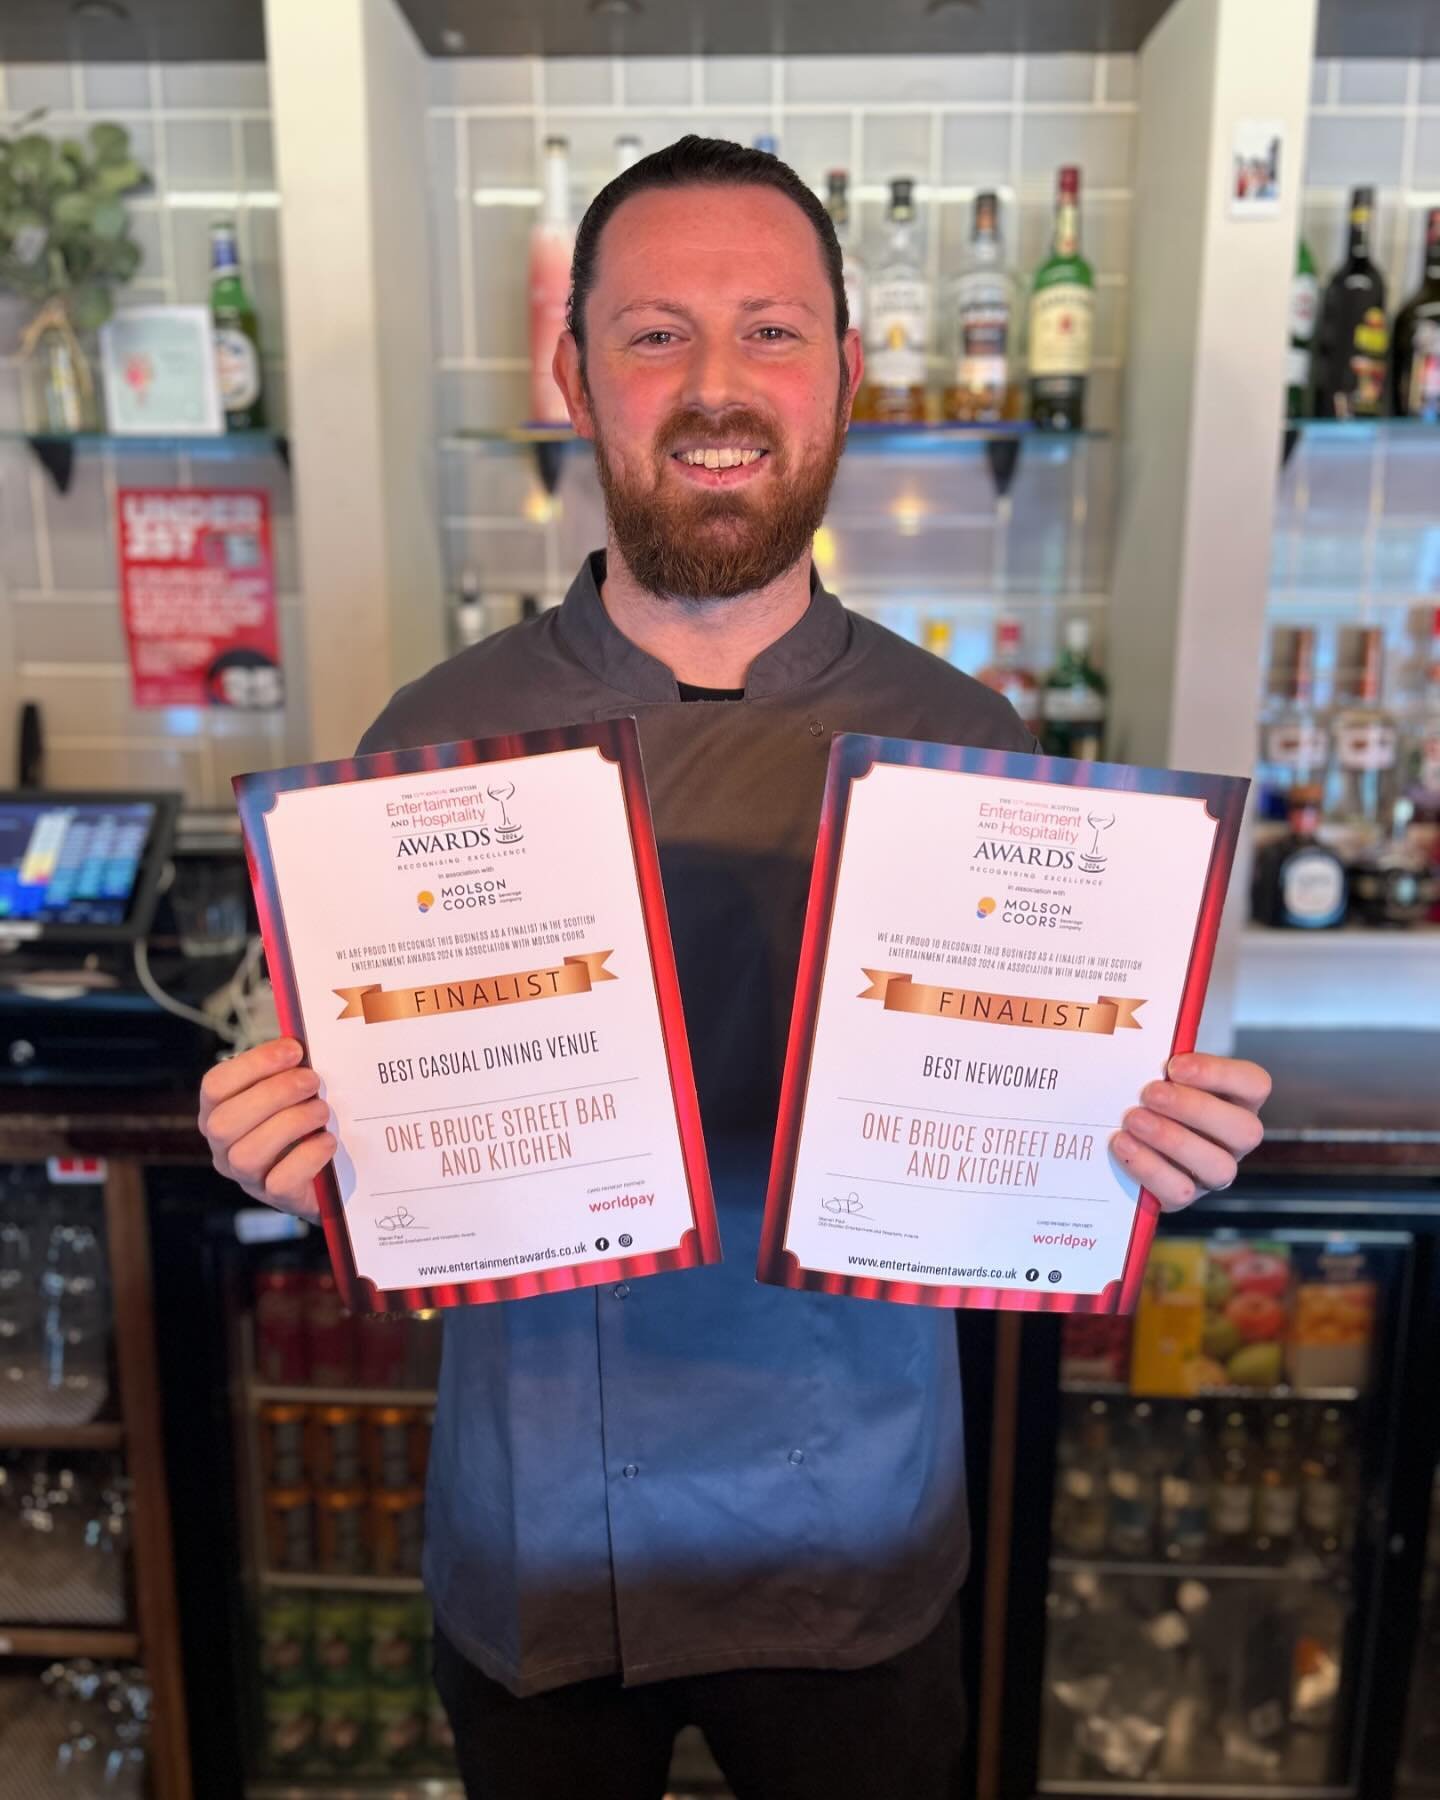 Delighted to have received our finalist certificates today!!

Thank you everyone for your support so far!

We&rsquo;re keeping our fingers and toes crossed for the Gala final in May 👀🤞🏻